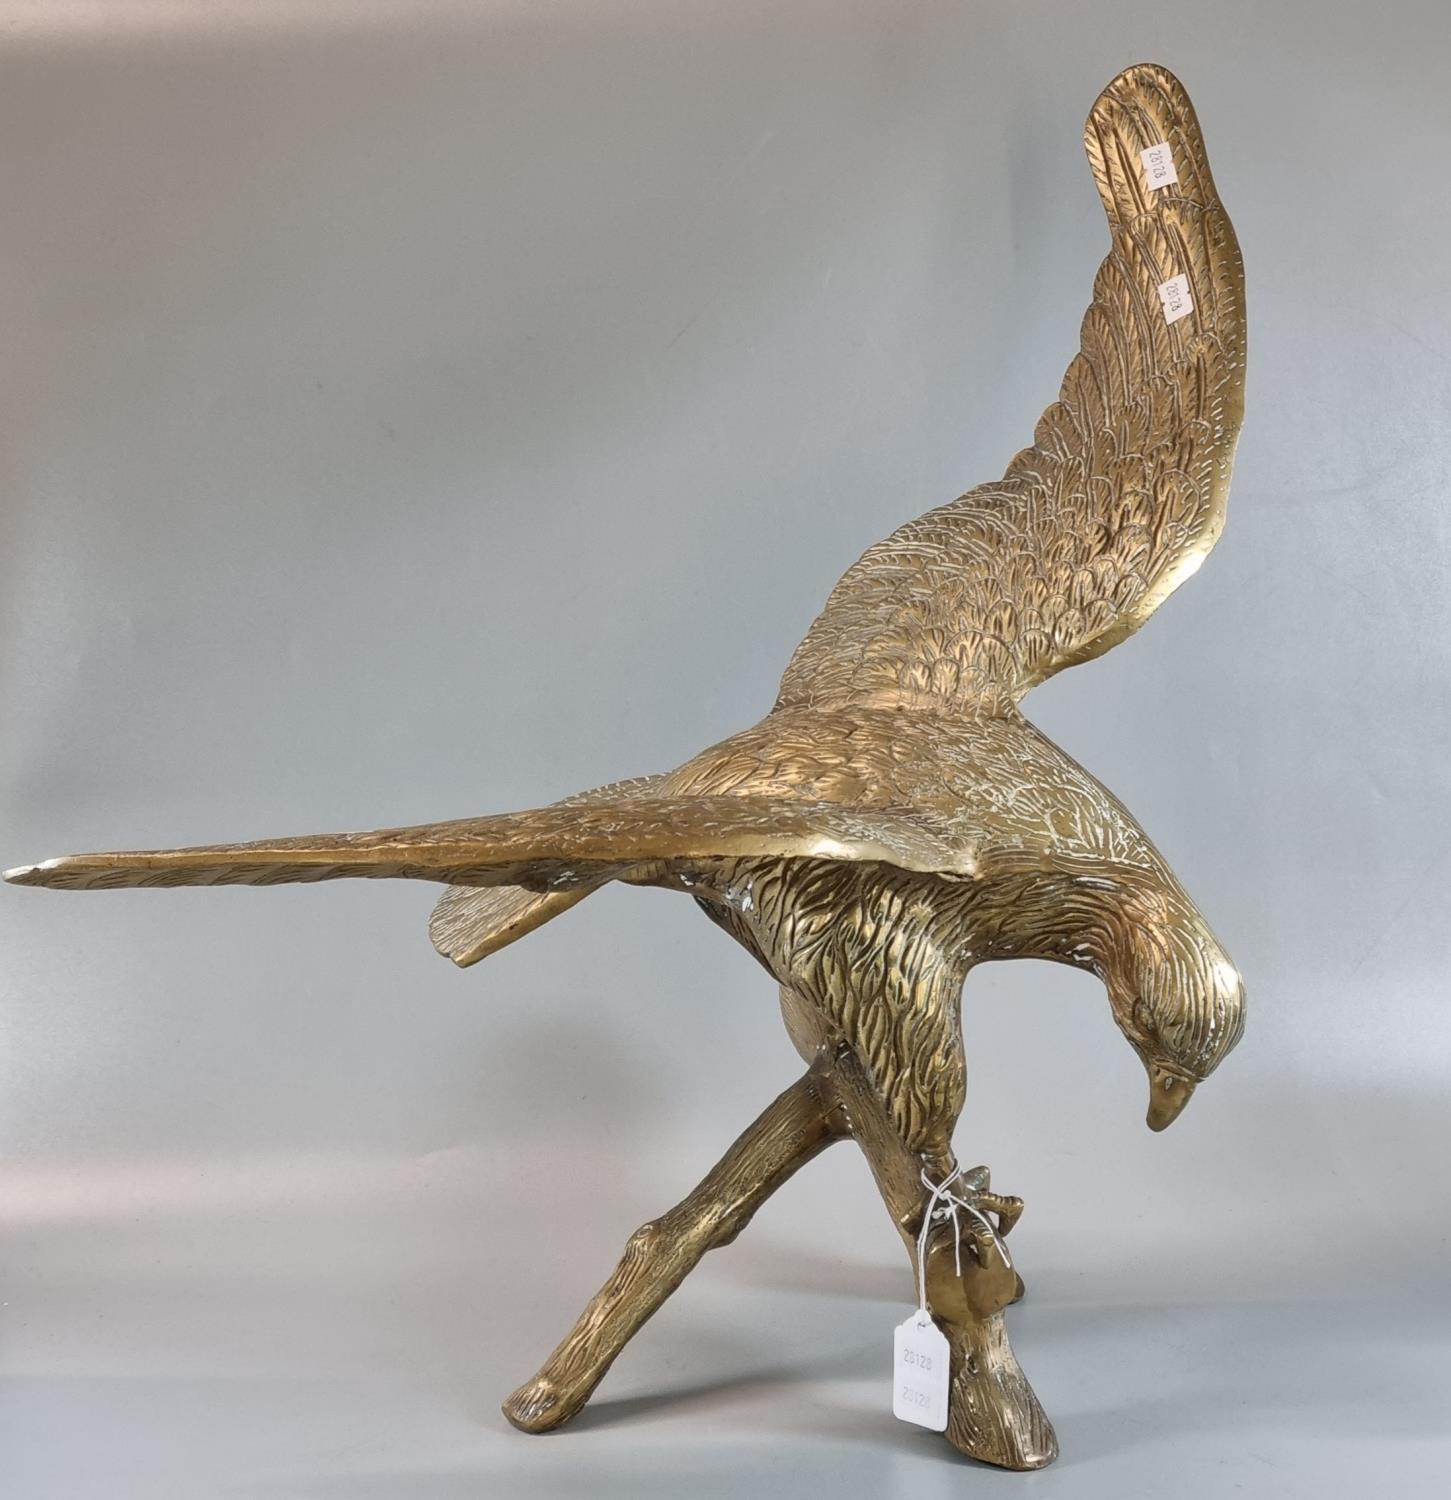 Brass sculpture of an eagle with outstretched wings, alighting on a branch. 55cm wide approx. (B.